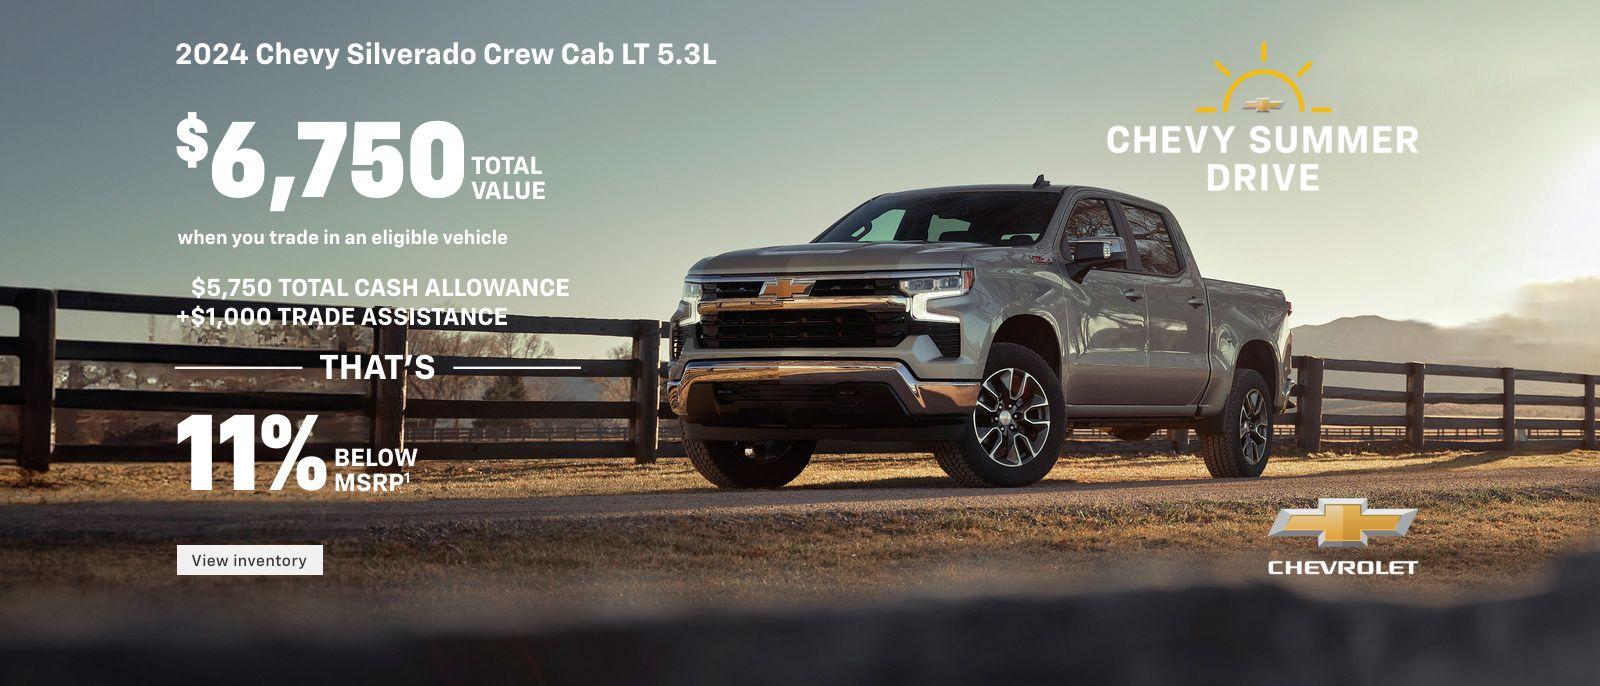 2024 Chevy Silverado 1500 Crew Cab LT 5.3L. Accept all challenges. $6,750 total value when you trade in an eligible vehicle. $5,750 total cash allowance + $1,000 trade assistance. That's 11% below MSRP.